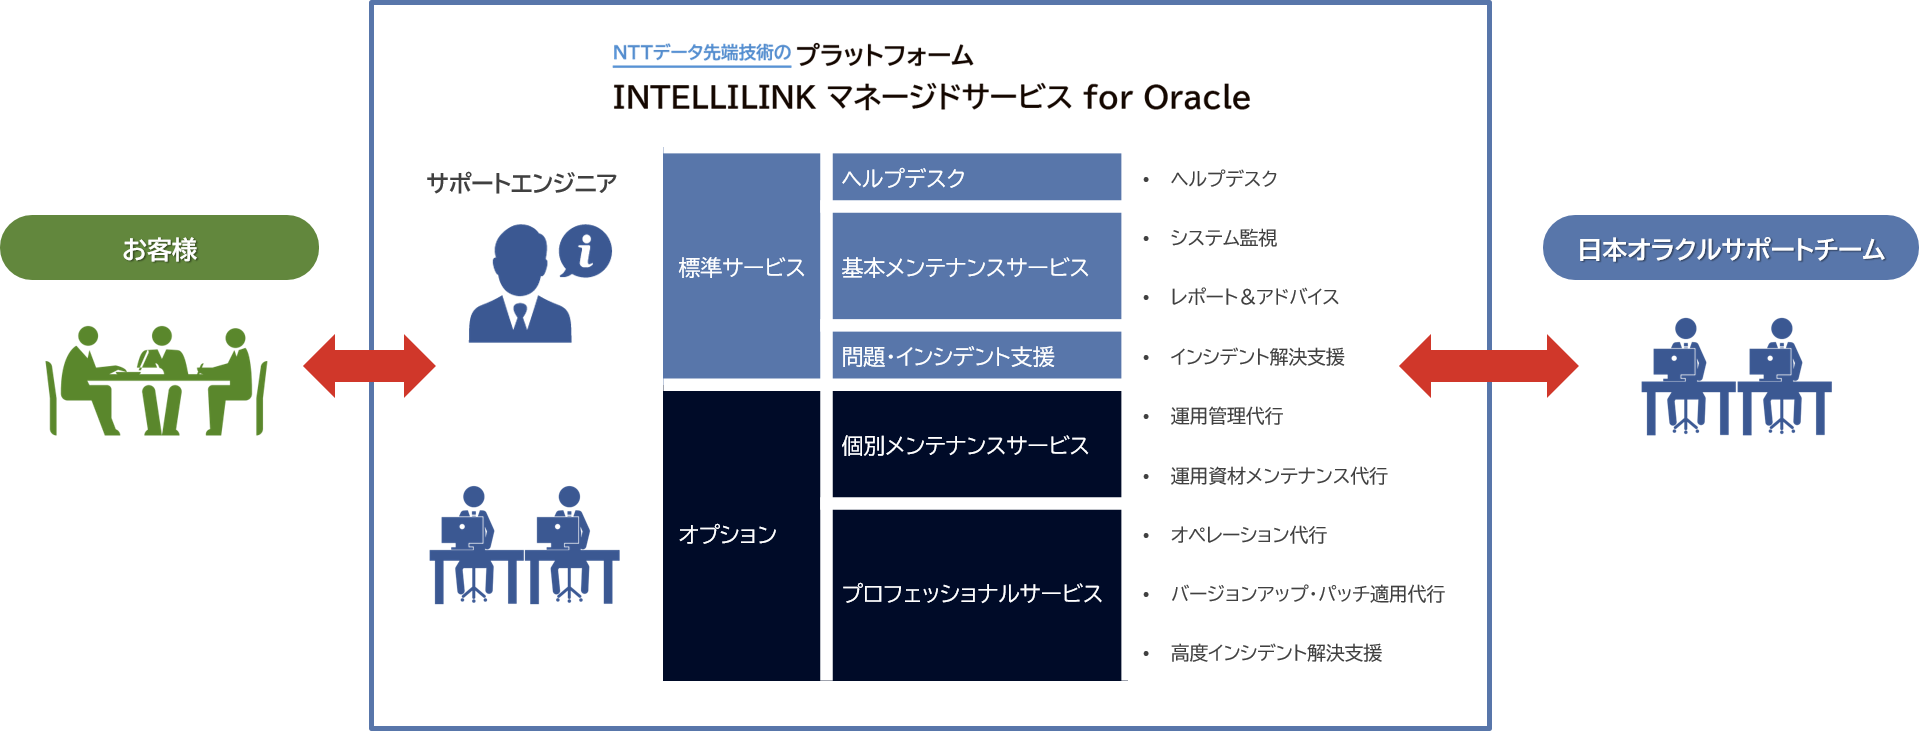 Configuration of INTELLILINK Managed Services for Oracle